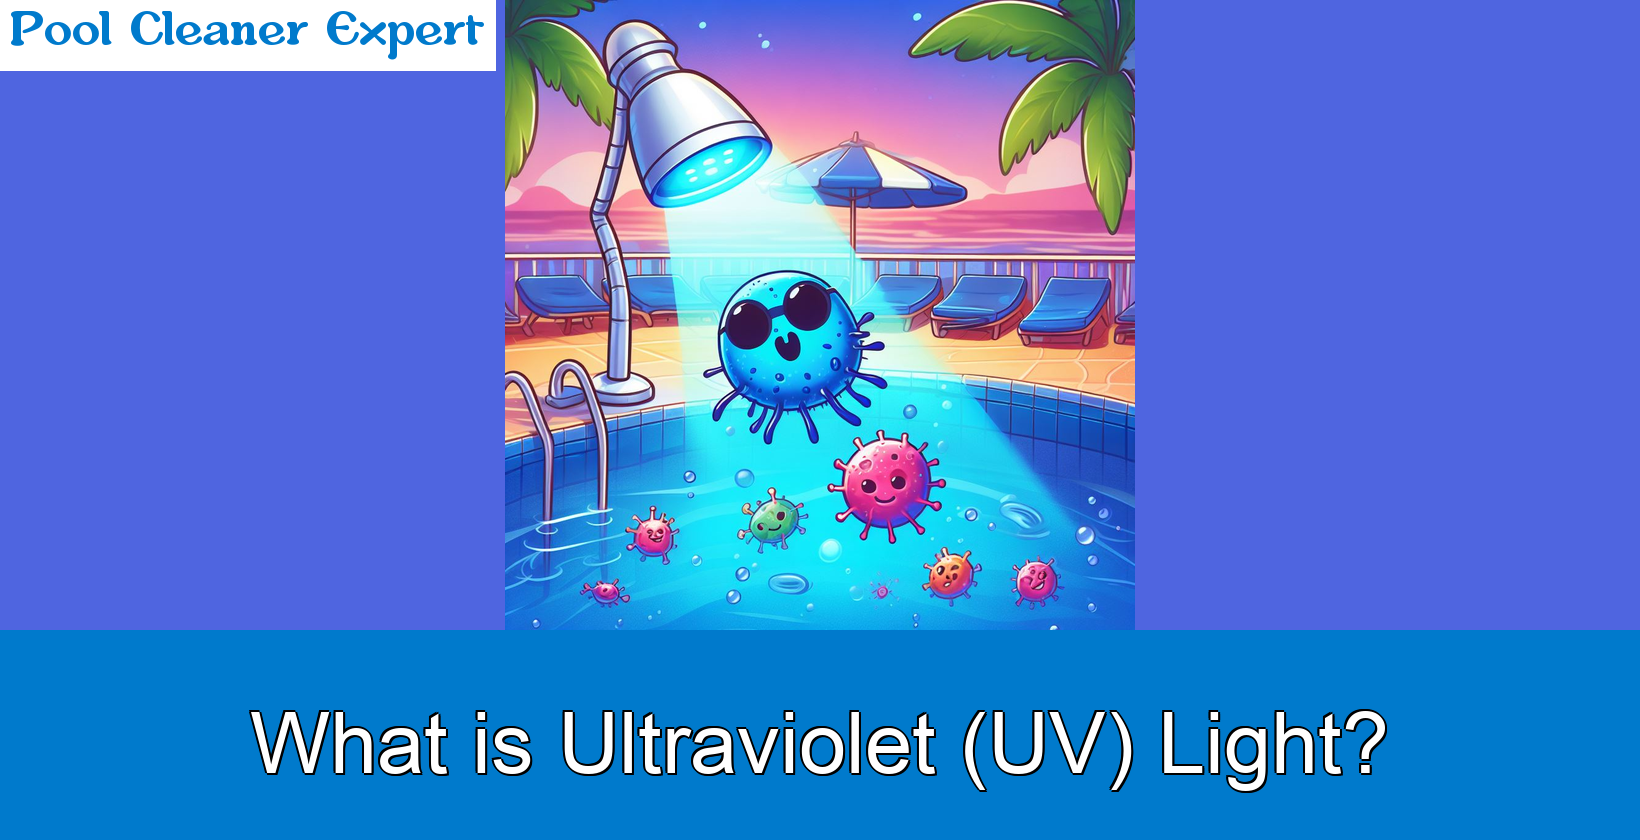 Ultraviolet (UV) Light in Pools: All You Need to Know